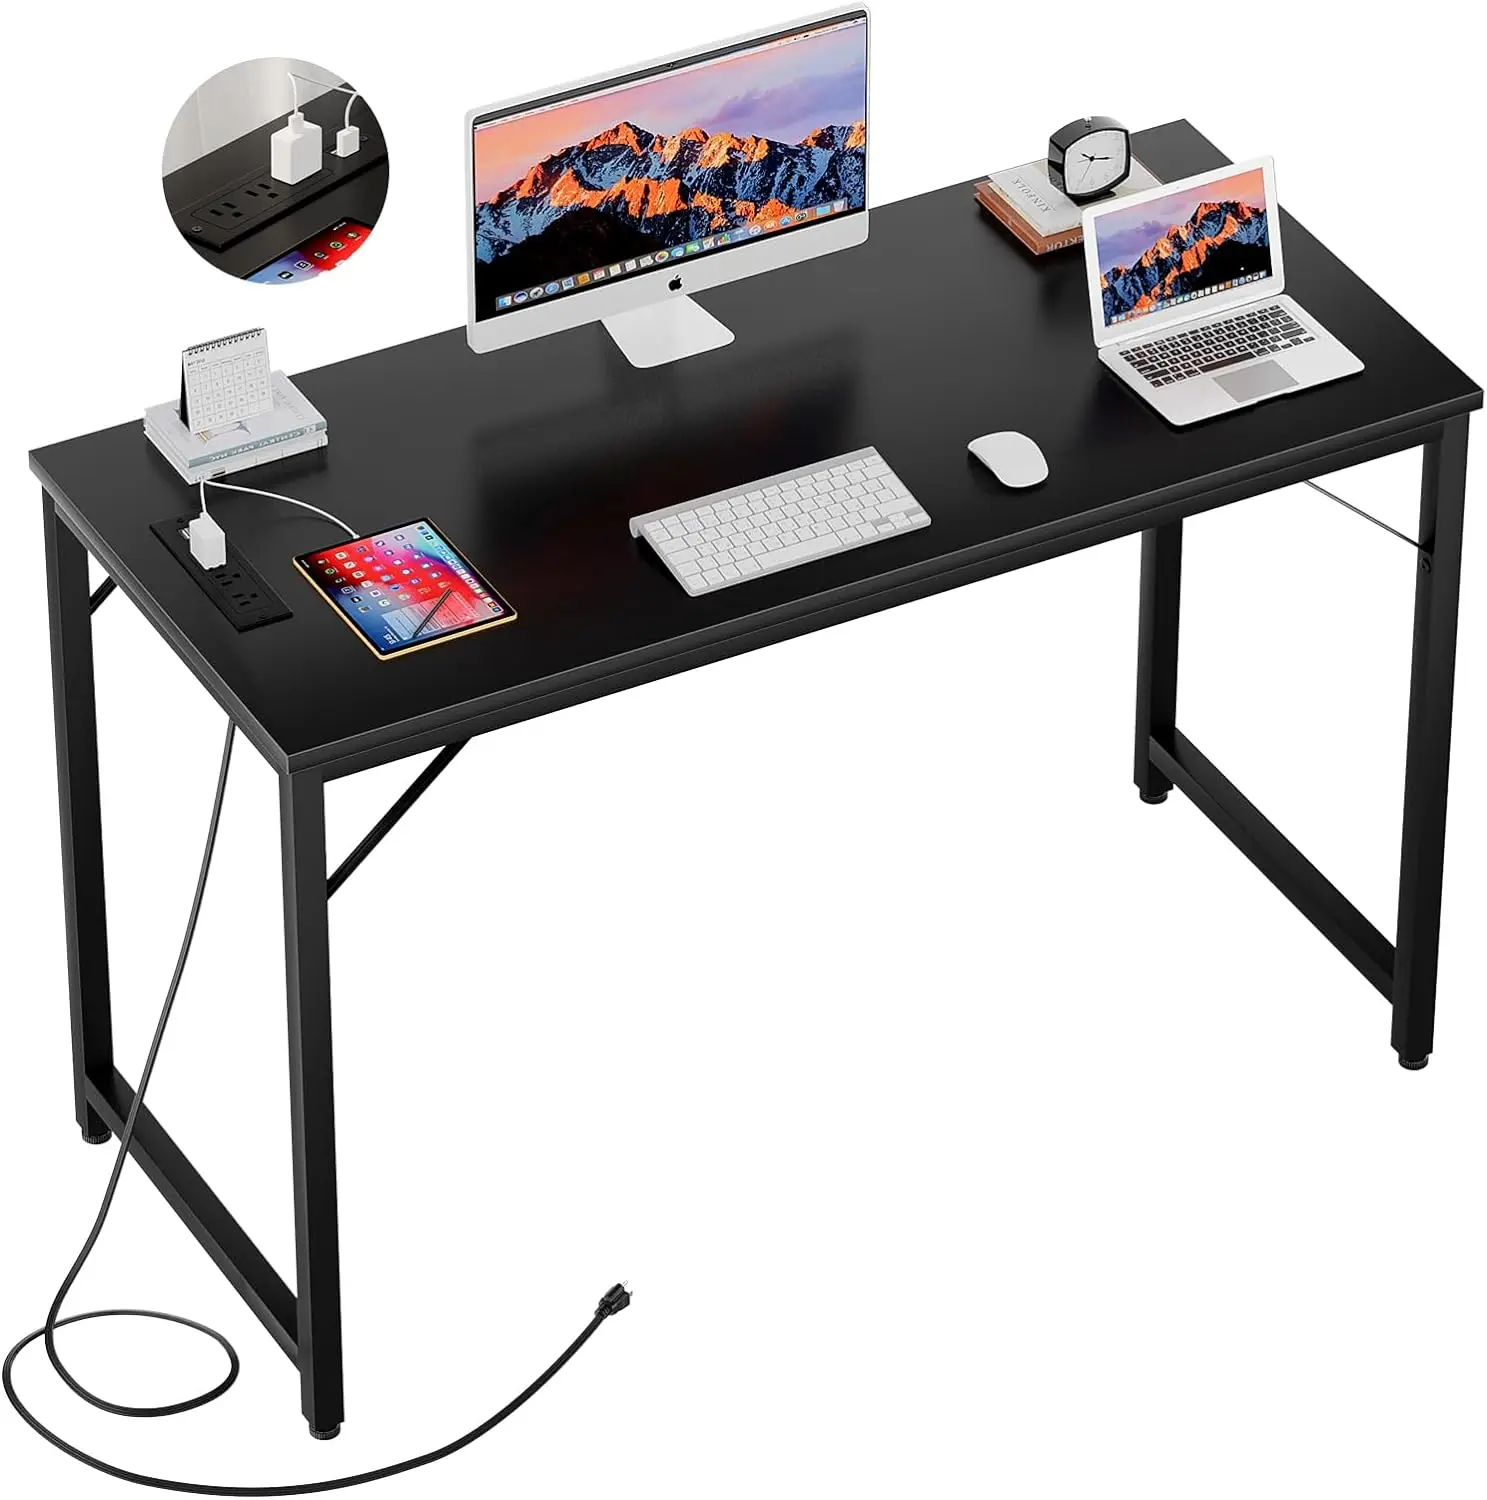 47 Inch Computer Desk with Magic Power Outlets, Modern Office Desk with USB Charging Ports, Sturdy Student Writing Desk maant dianba no 1 pd 25w 8 ports multi function wireless smart charging qc 3 0 phone charger anti short circuit repair function